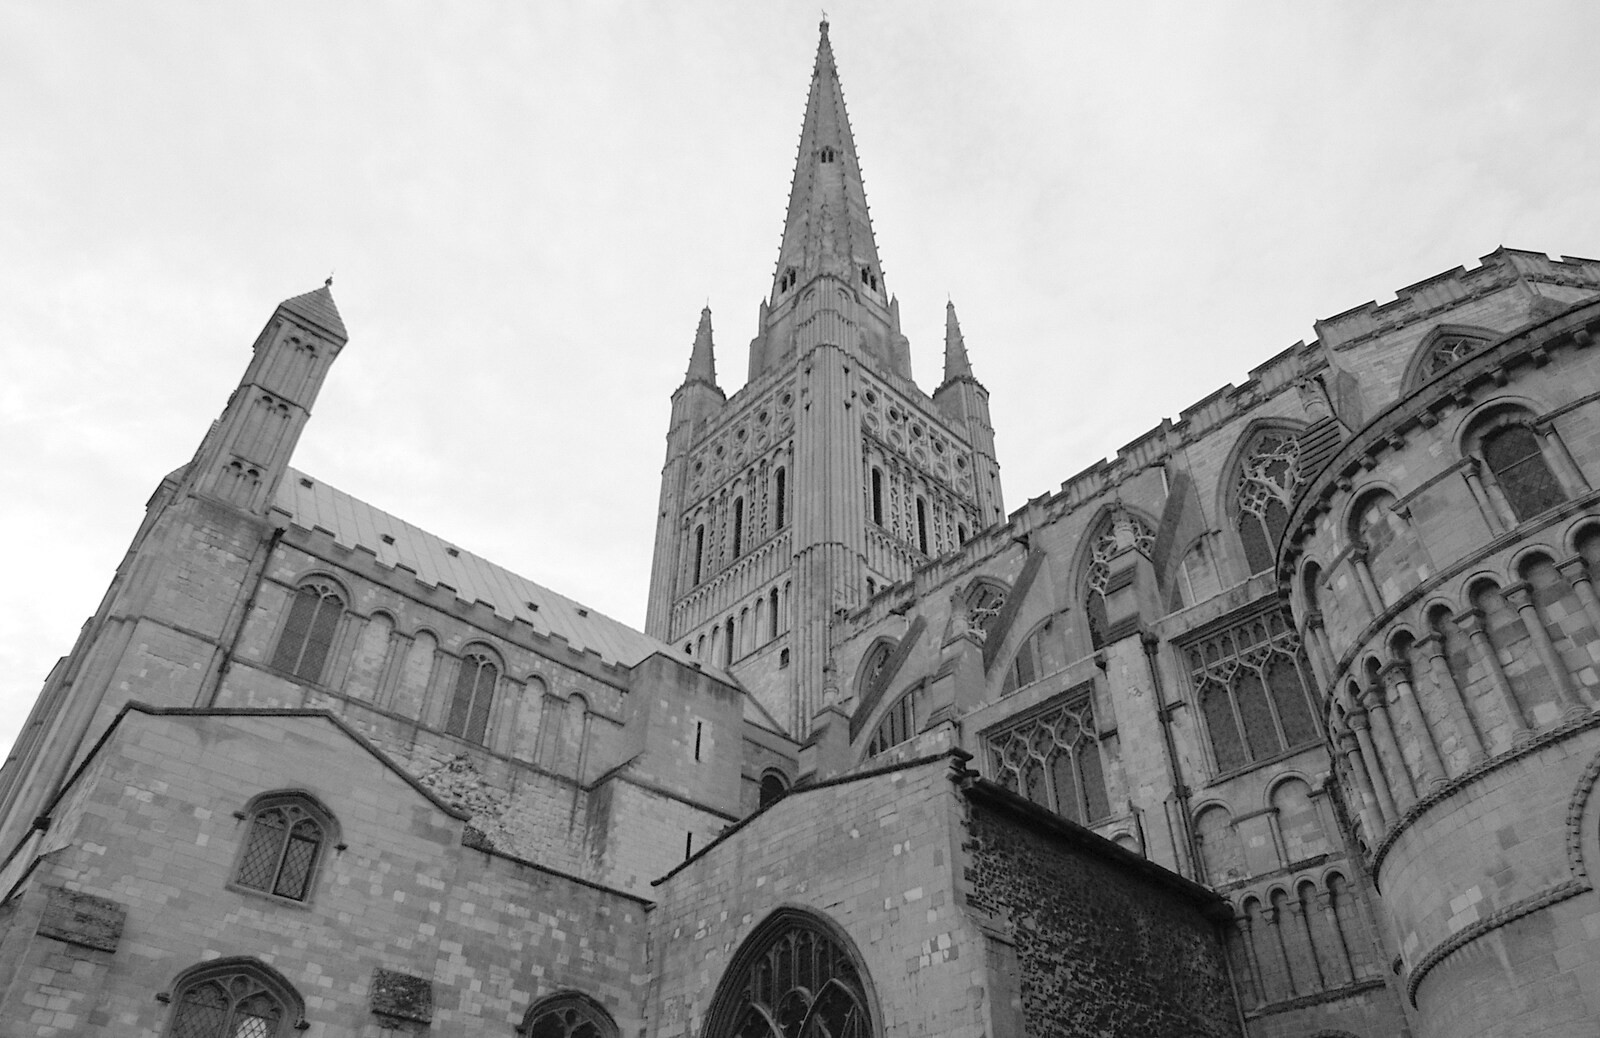 Looking up at the spire from CISU Networks and Autumn Leaves at Norwich Cathedral, Eye and Norwich - 29th October 2005